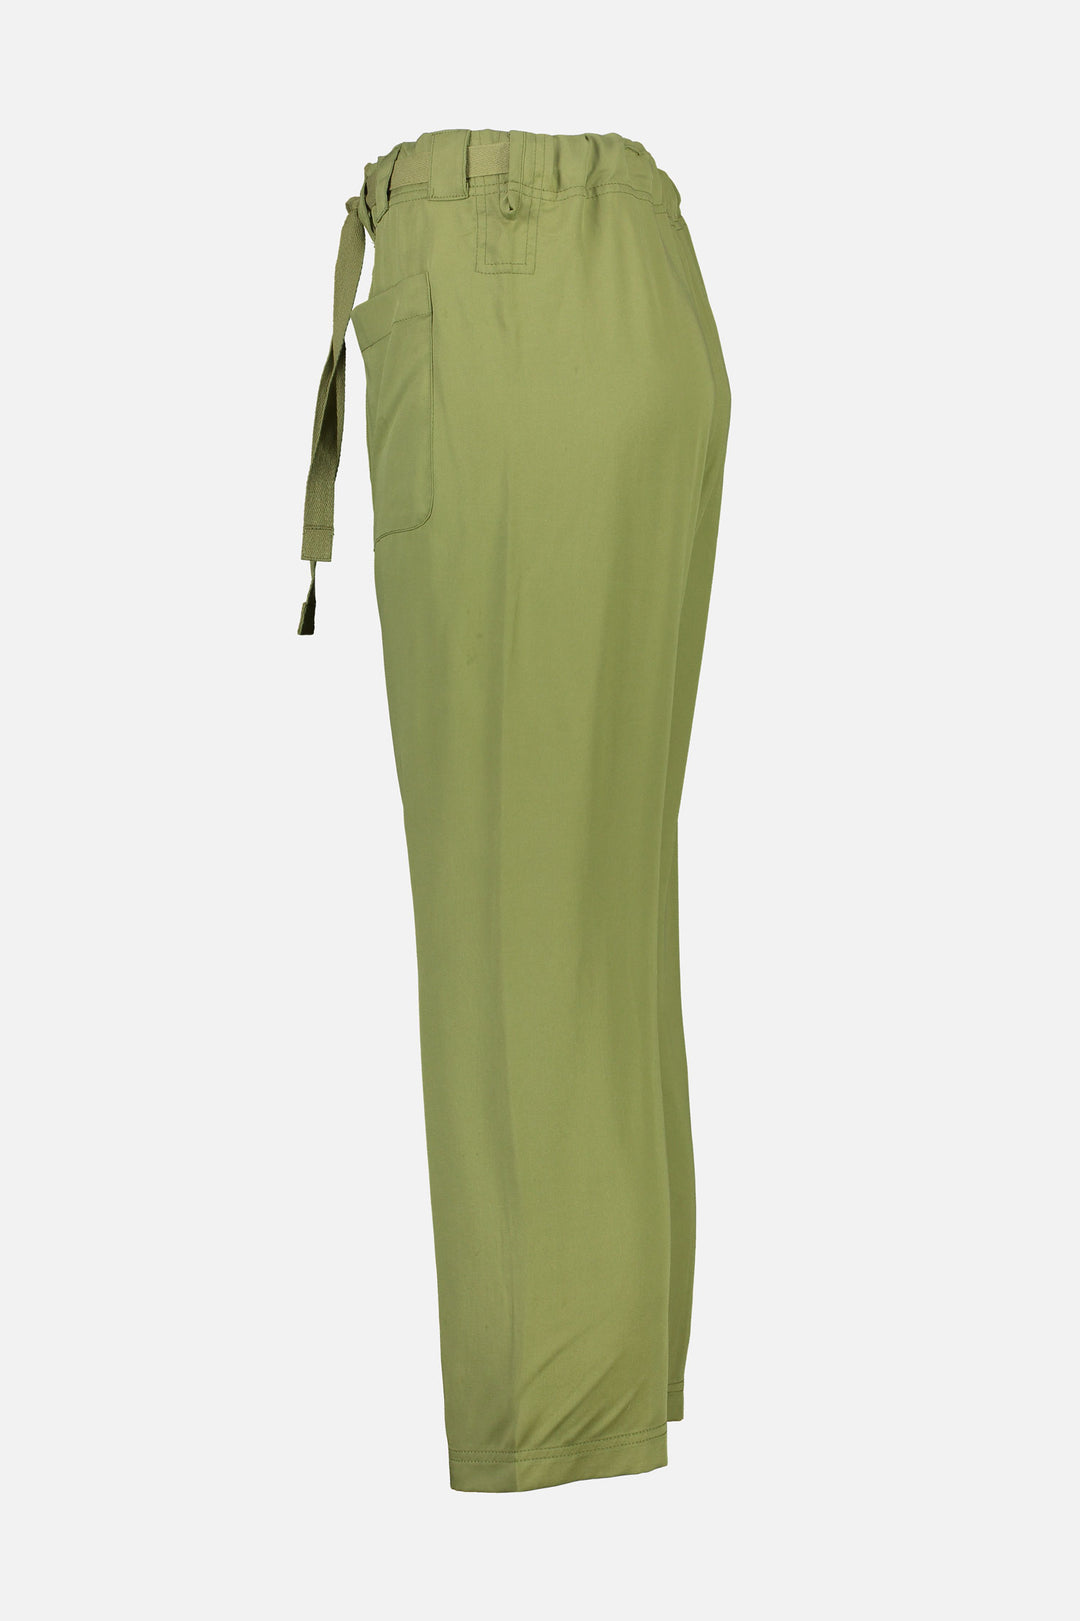 Videris Lingerie Quinn Pyjama pant in olive TENCEL™ relaxed cut with drawstring waist and front patch pockets